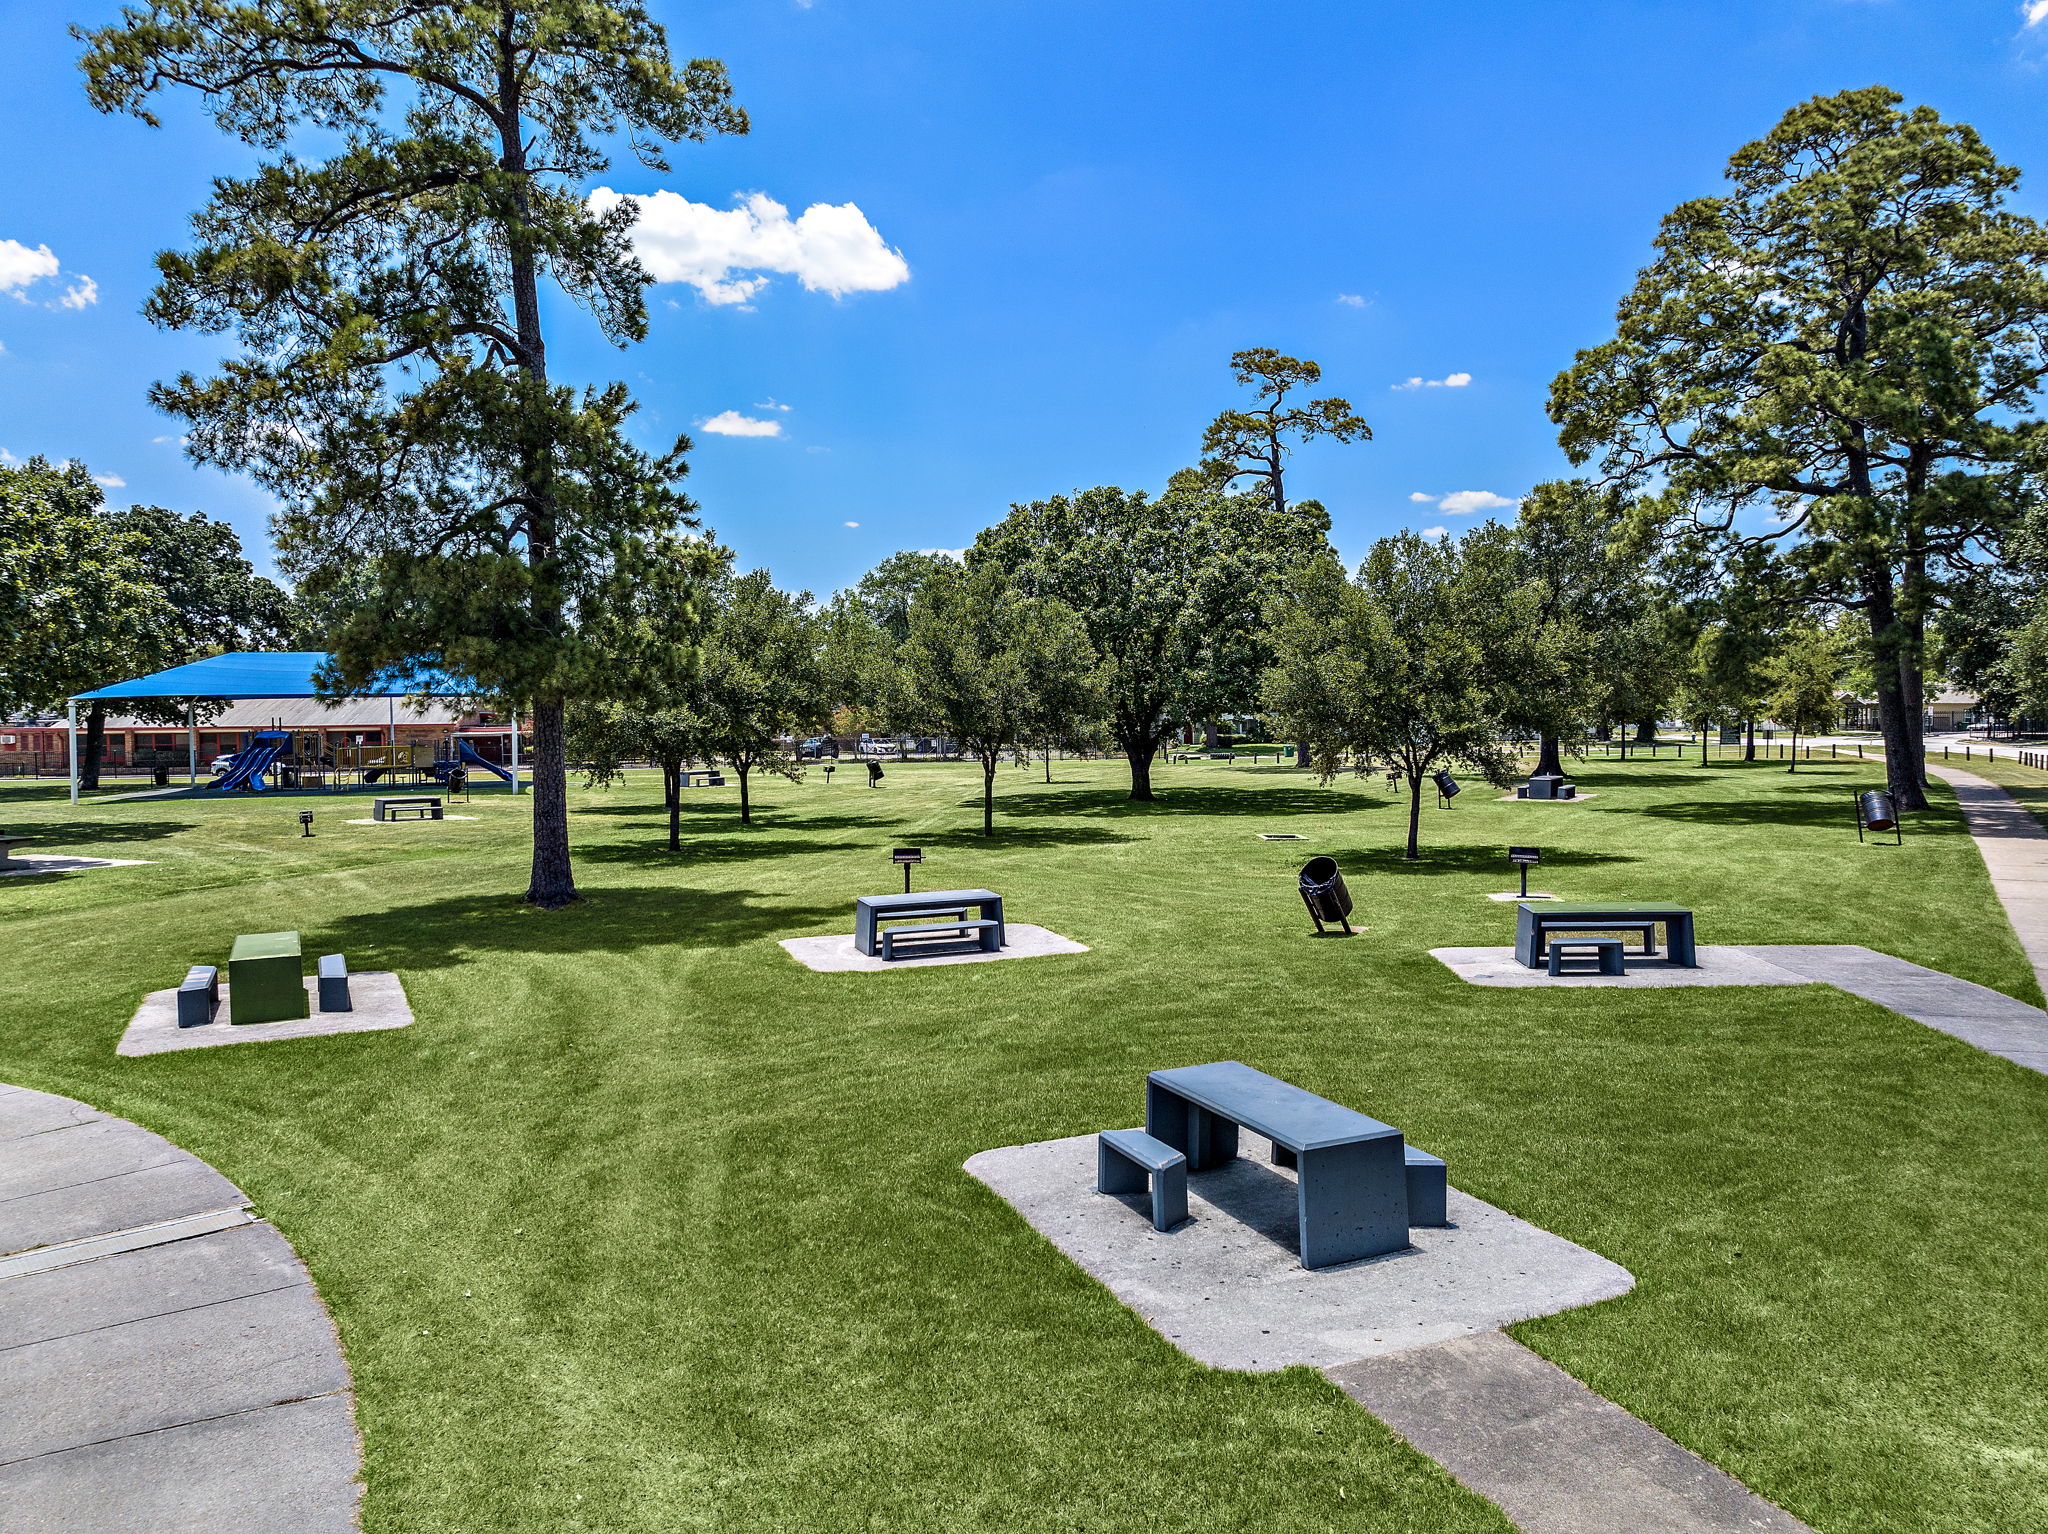 Finnigan Park with green grass, tall trees, and a playground